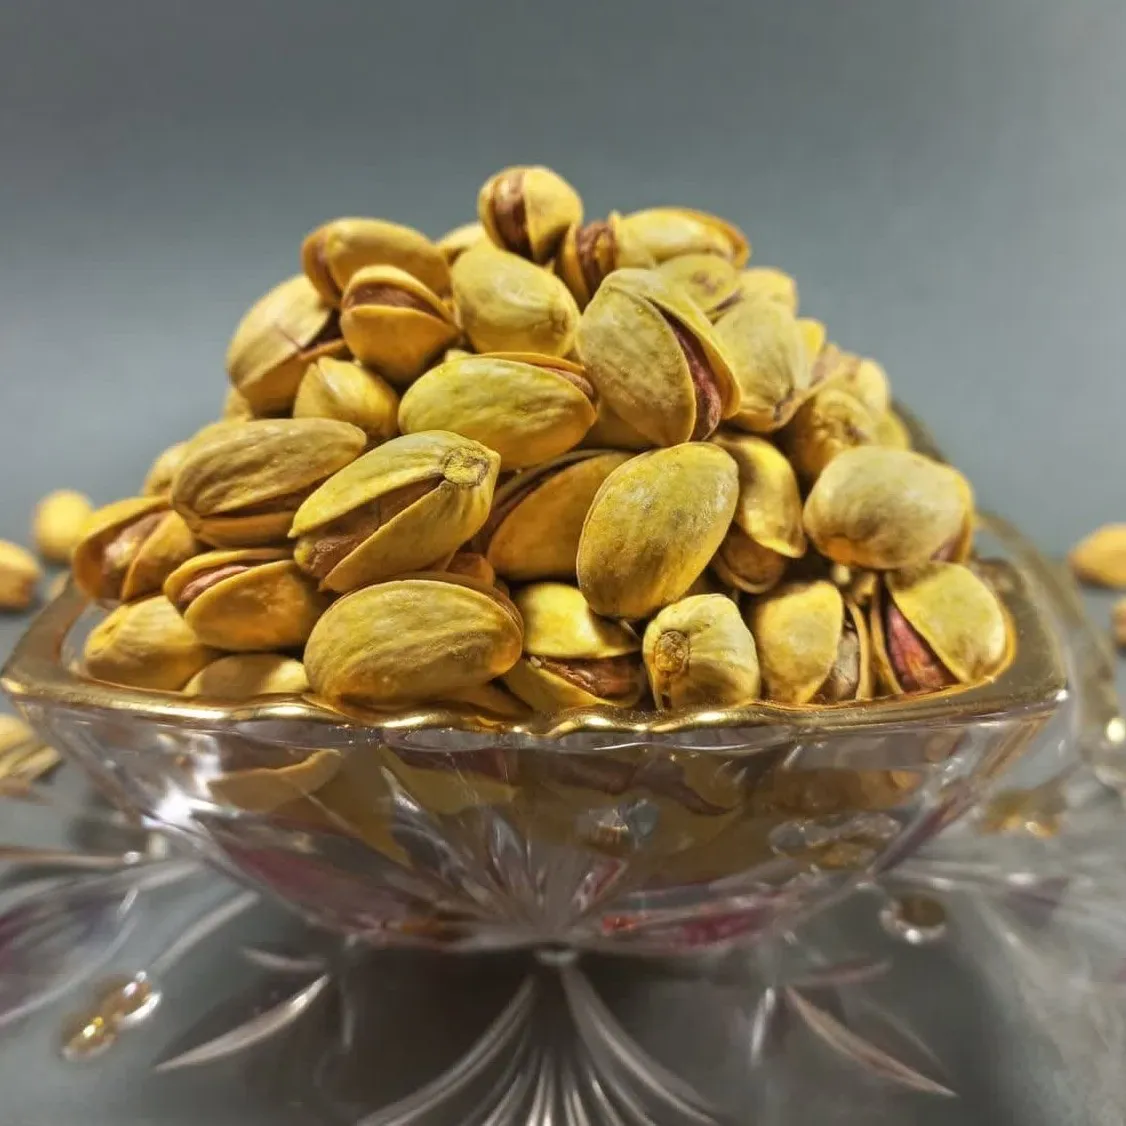 Price and buy best pistachio brand in India + cheap sale